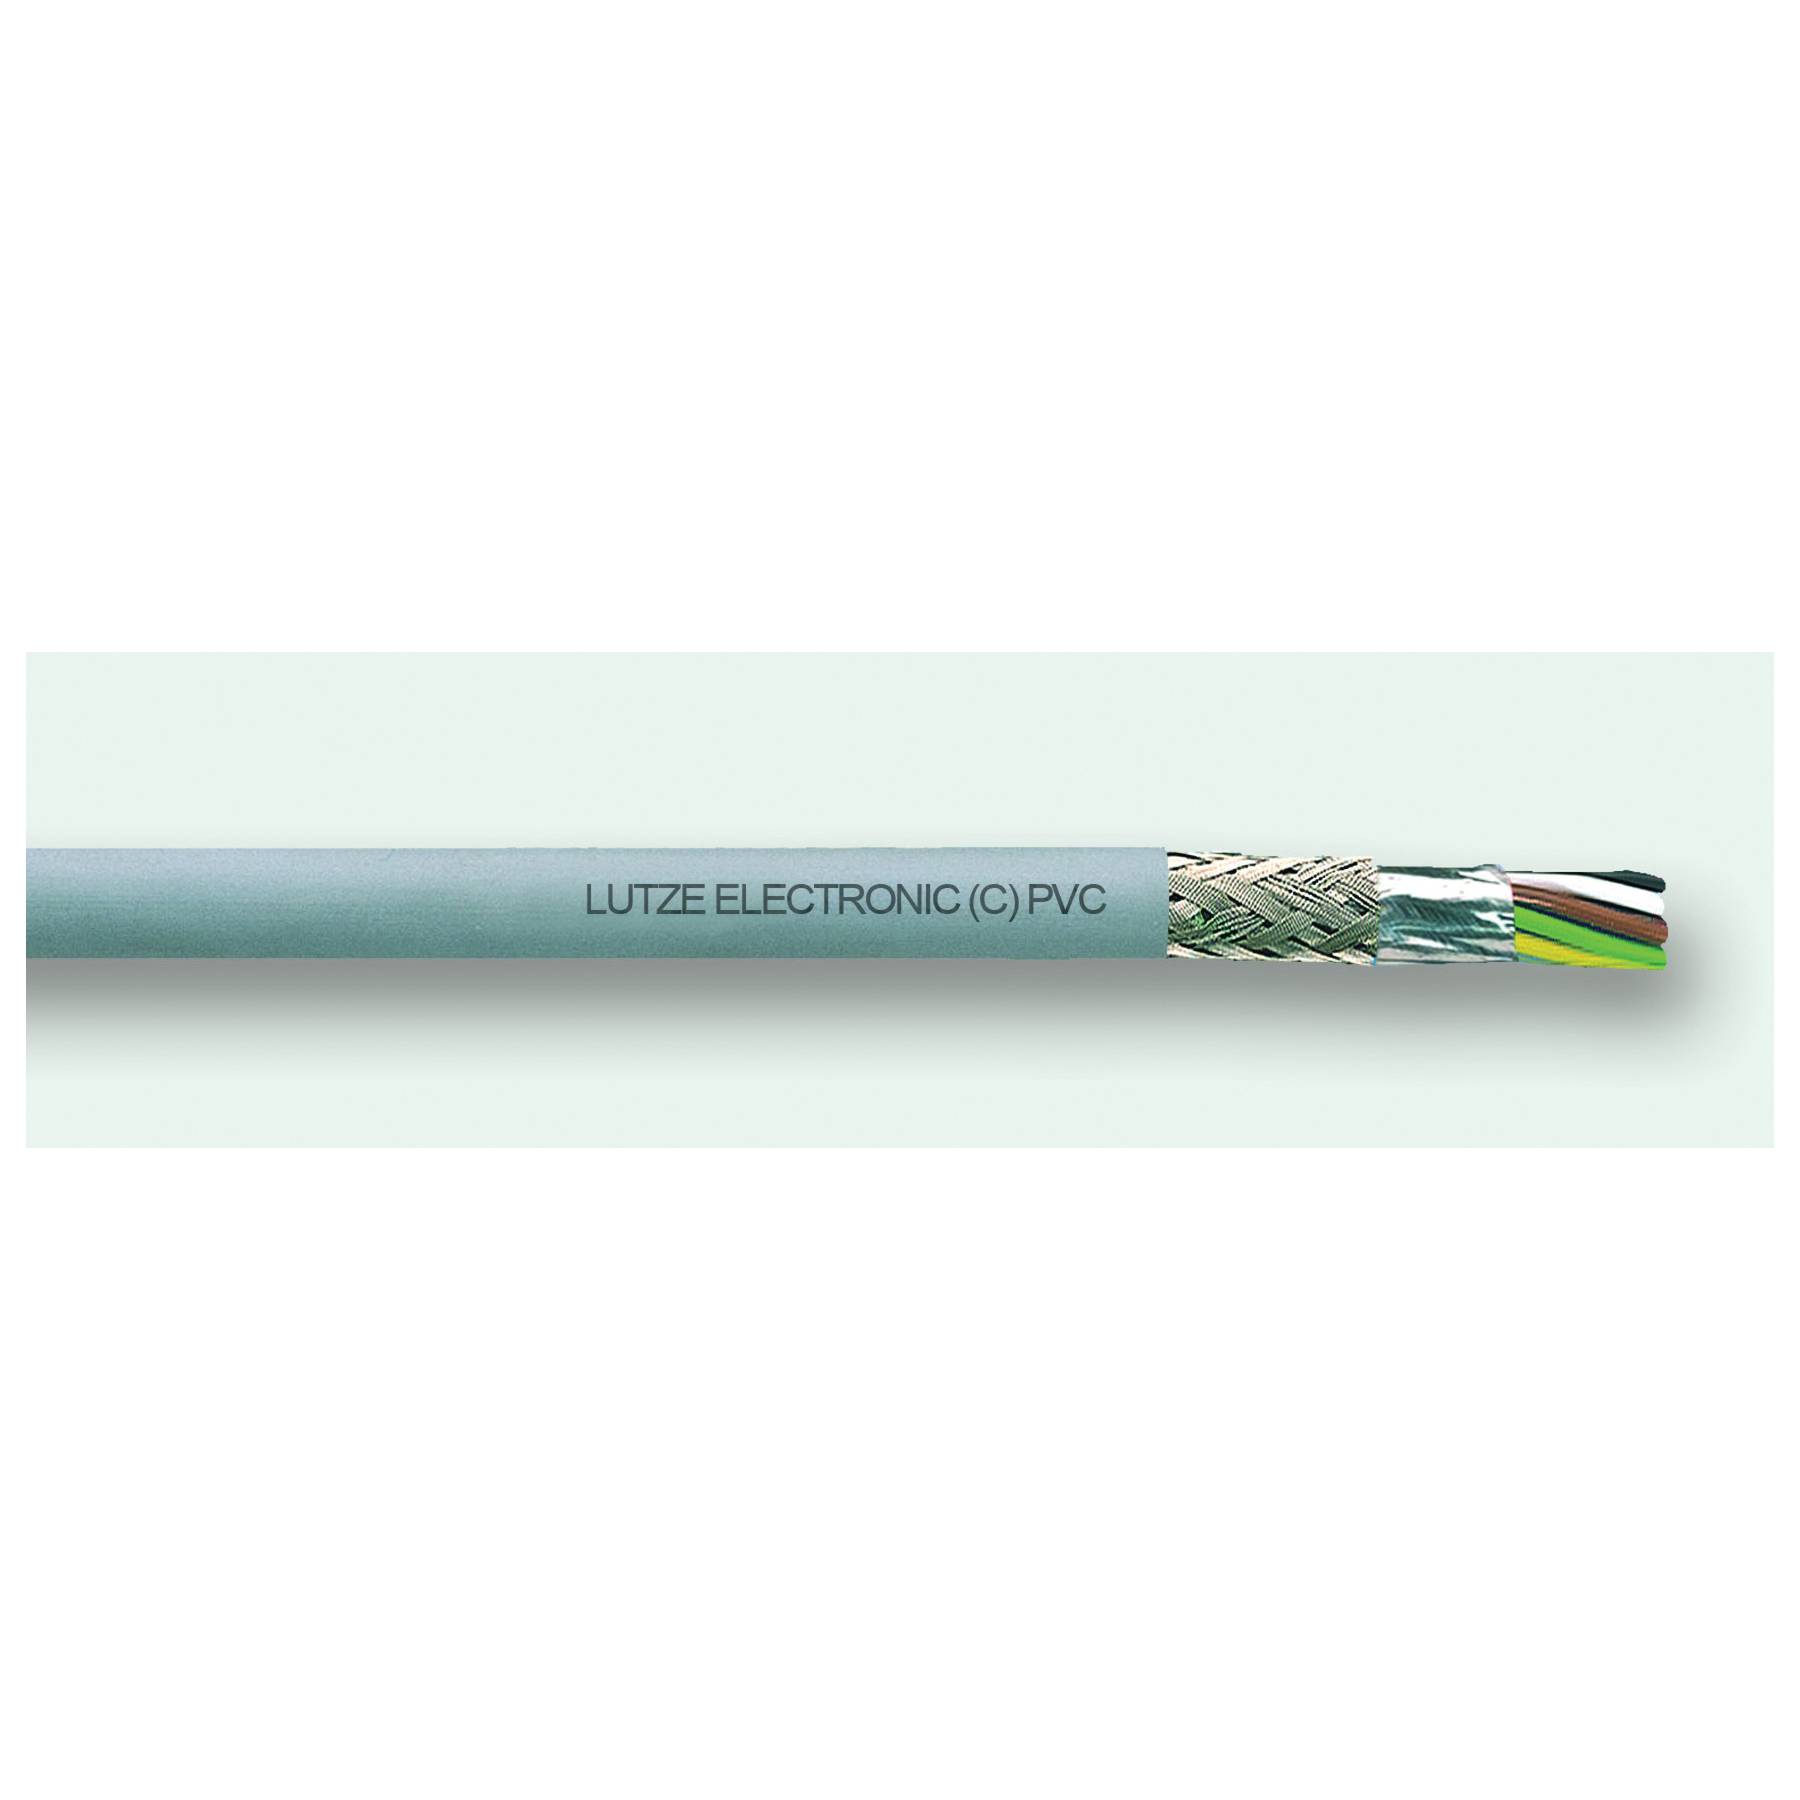 LUTZE A3132210 Shielded Flexible Electronic Cable, 300 V, (10) 22 AWG Stranded Tinned Copper Conductor